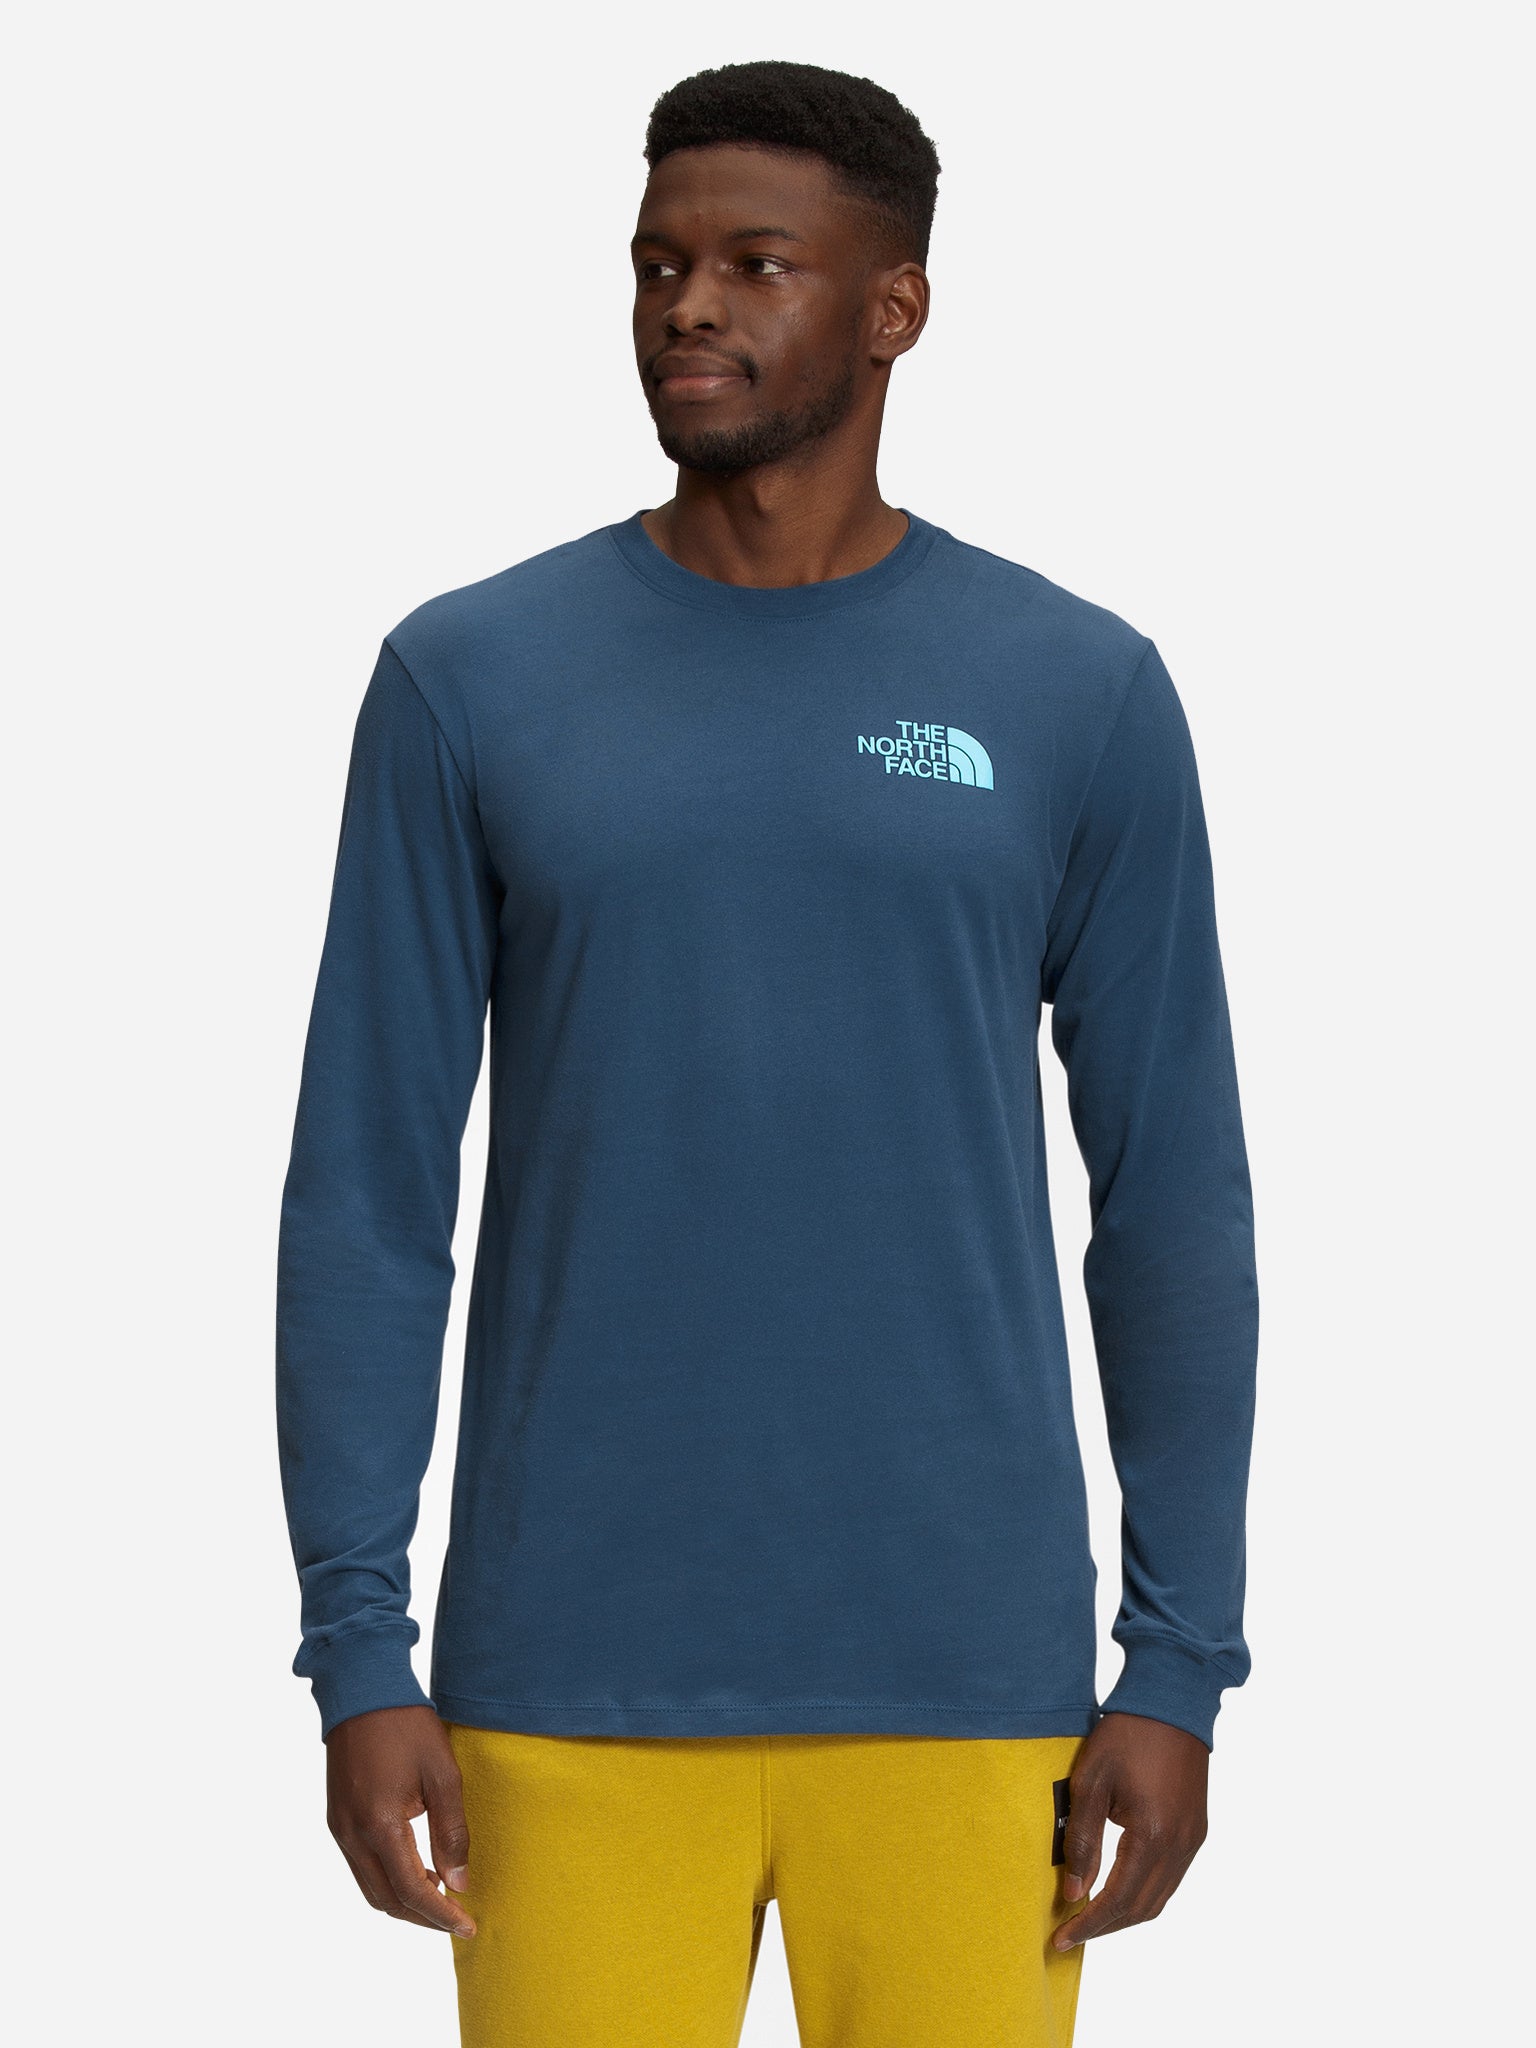 The North Face Men’s Long-Sleeve Graphic Injection Tee